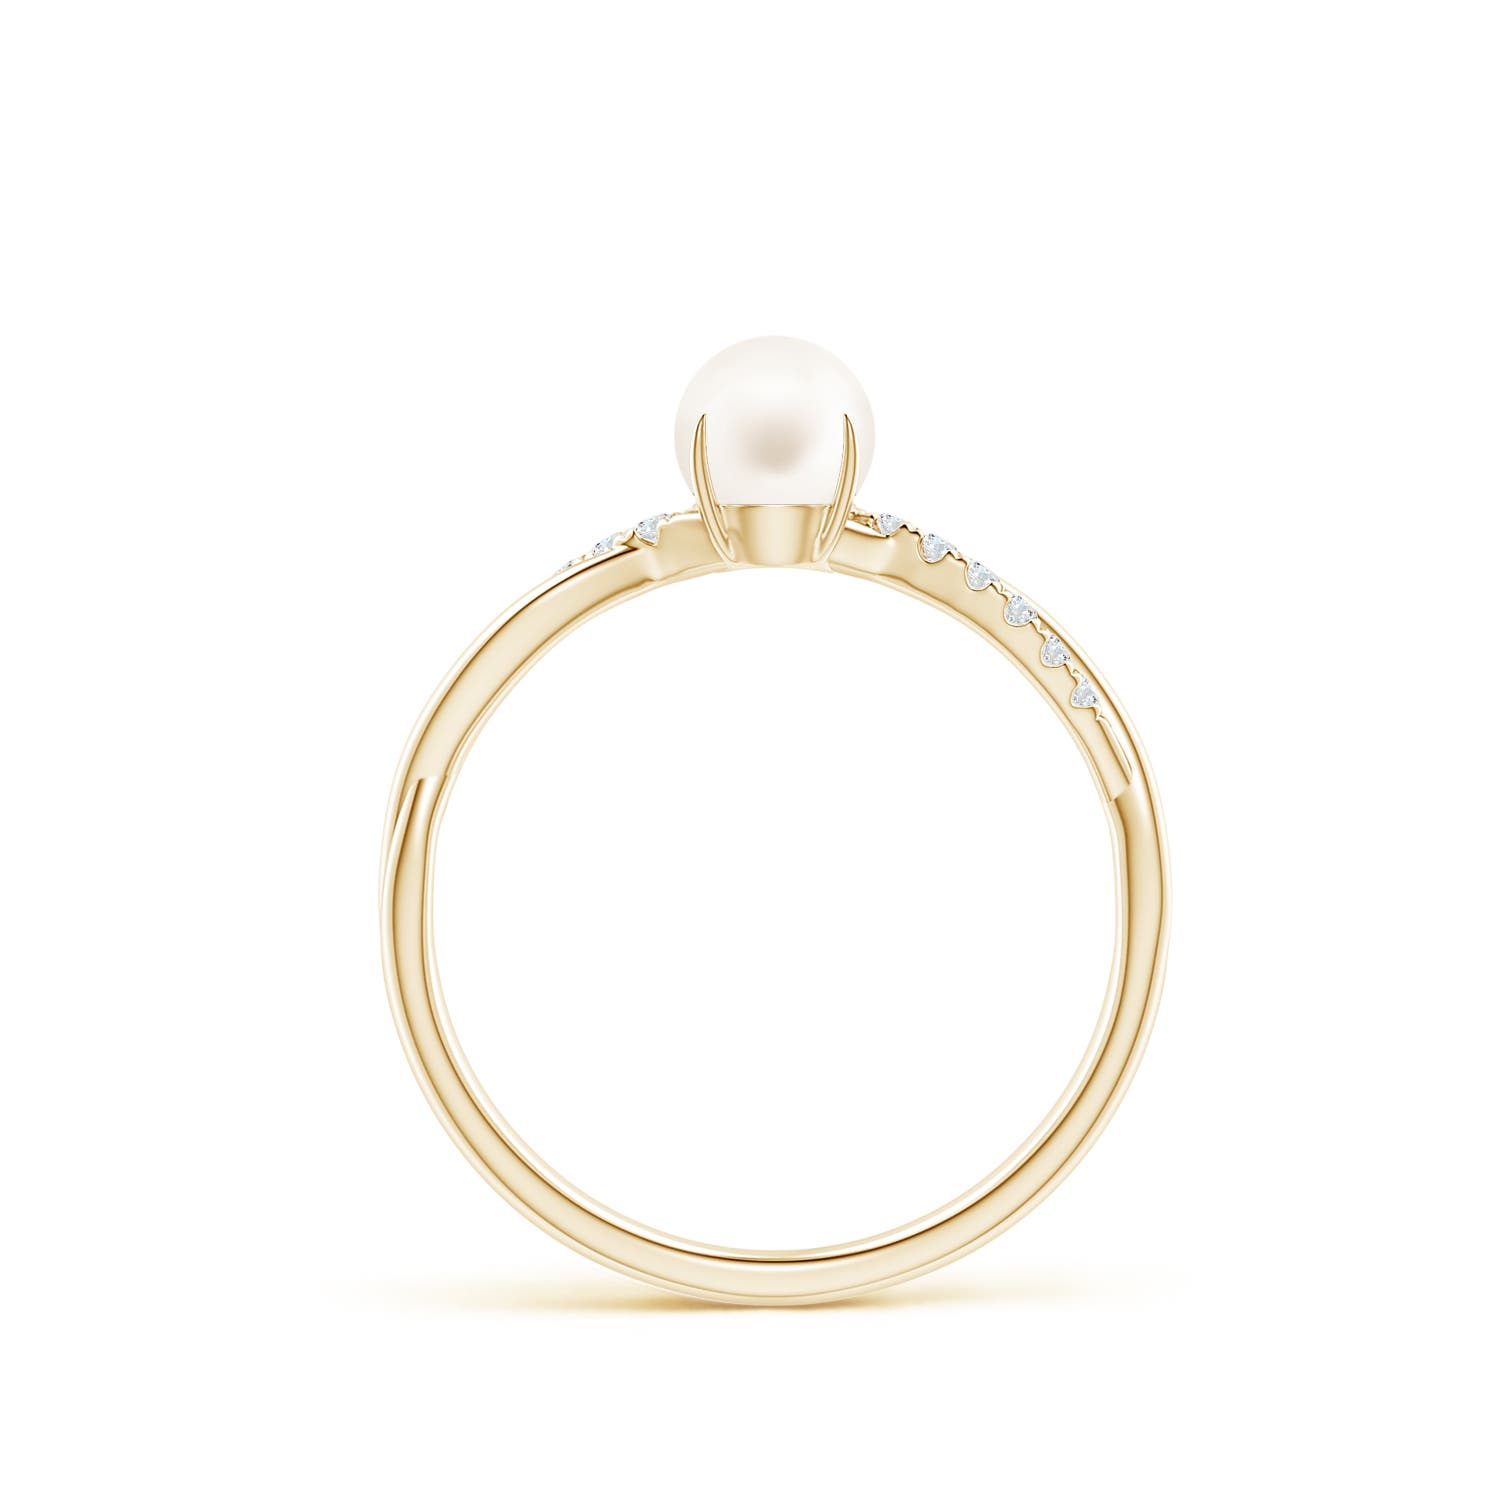 AA / 0.96 CT / 14 KT Yellow Gold